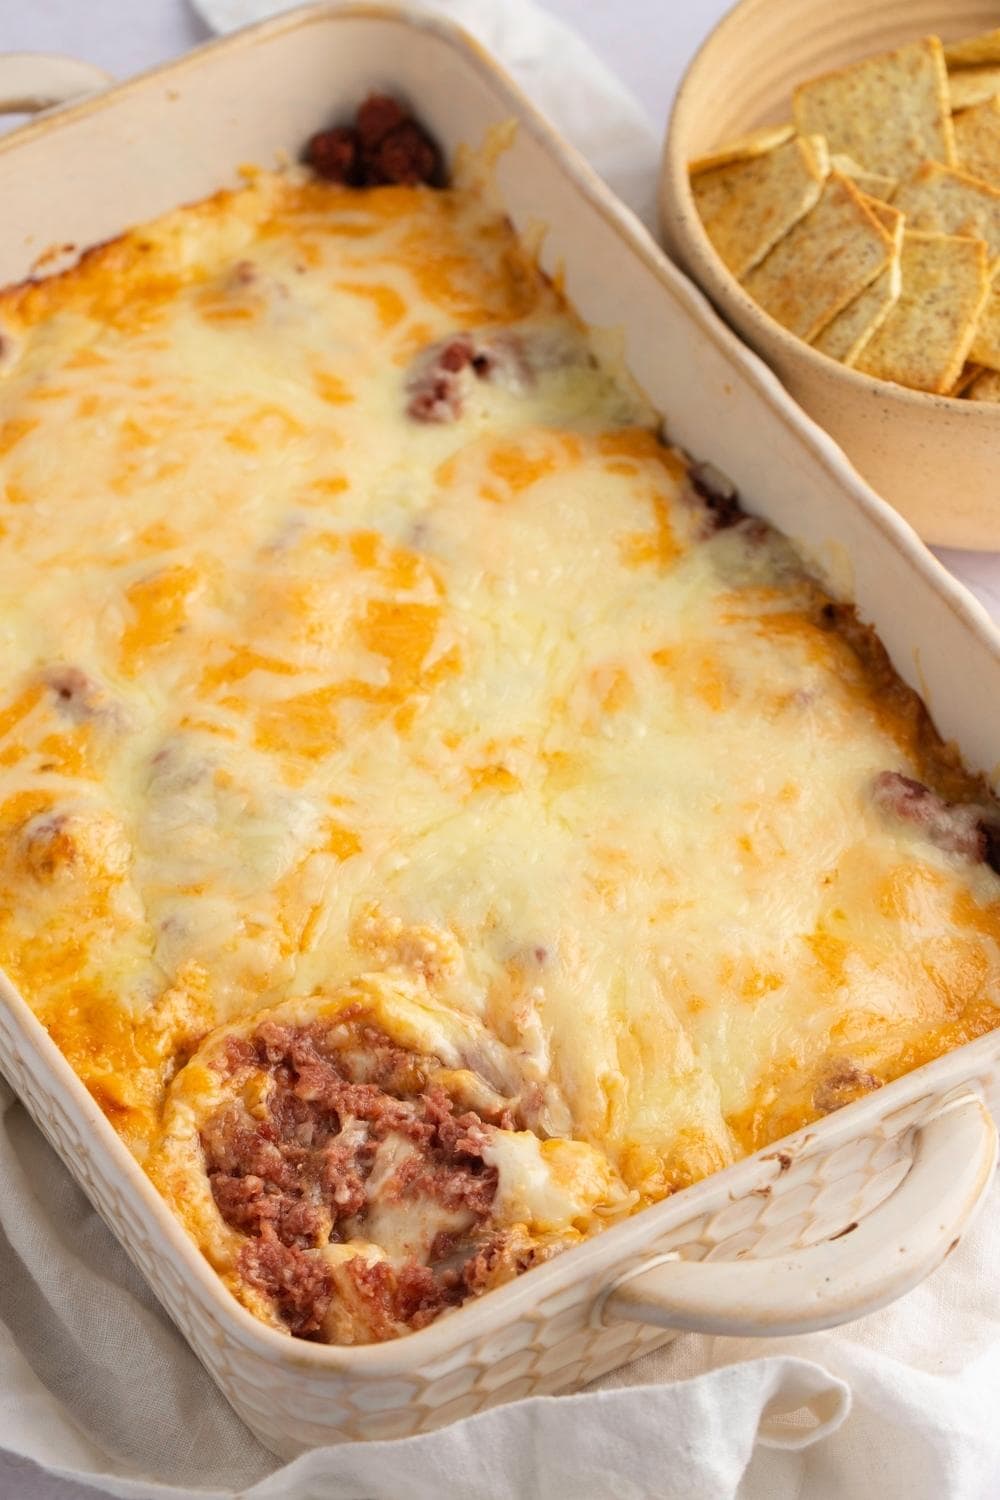 Mix of corned beef, sauerkraut, mayo dressing and lots of melted cheese on top served on a casserole